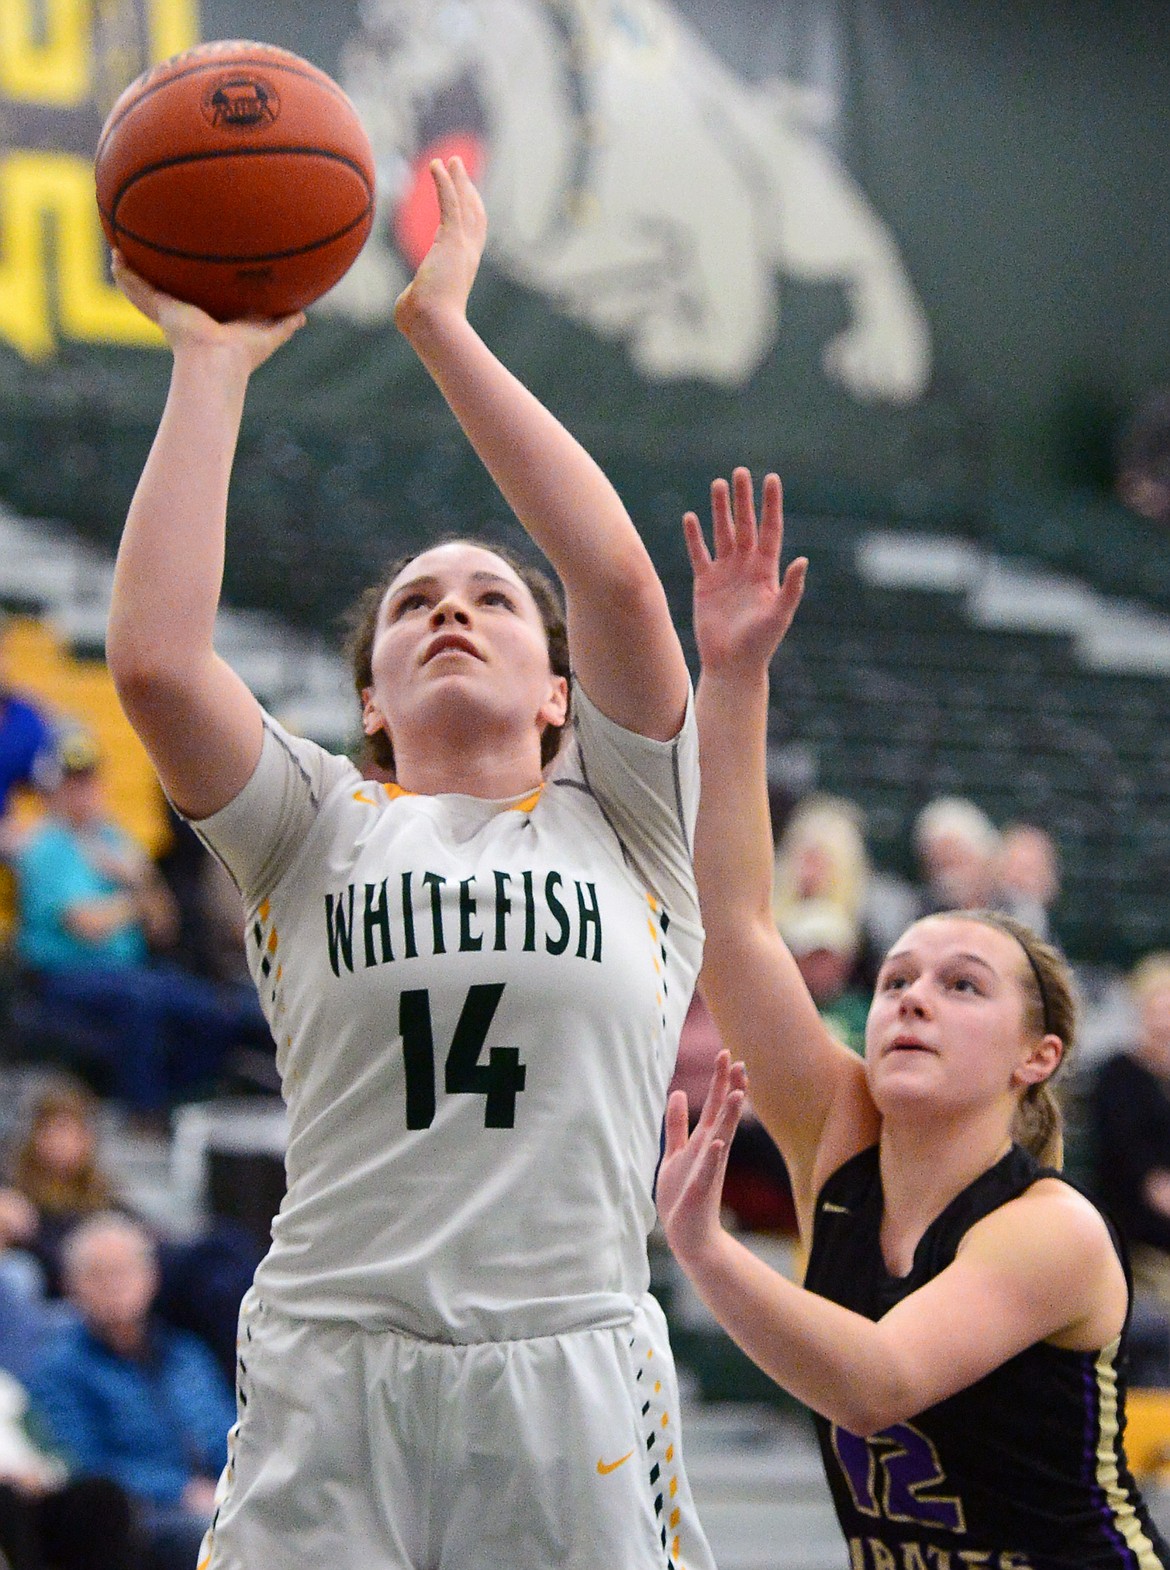 Whitefish's Gracie Smyley (14) goes to the hoop in front of Polson's Shayla Olson (12) at Whitefish High School on Friday. (Casey Kreider/Daily Inter Lake)